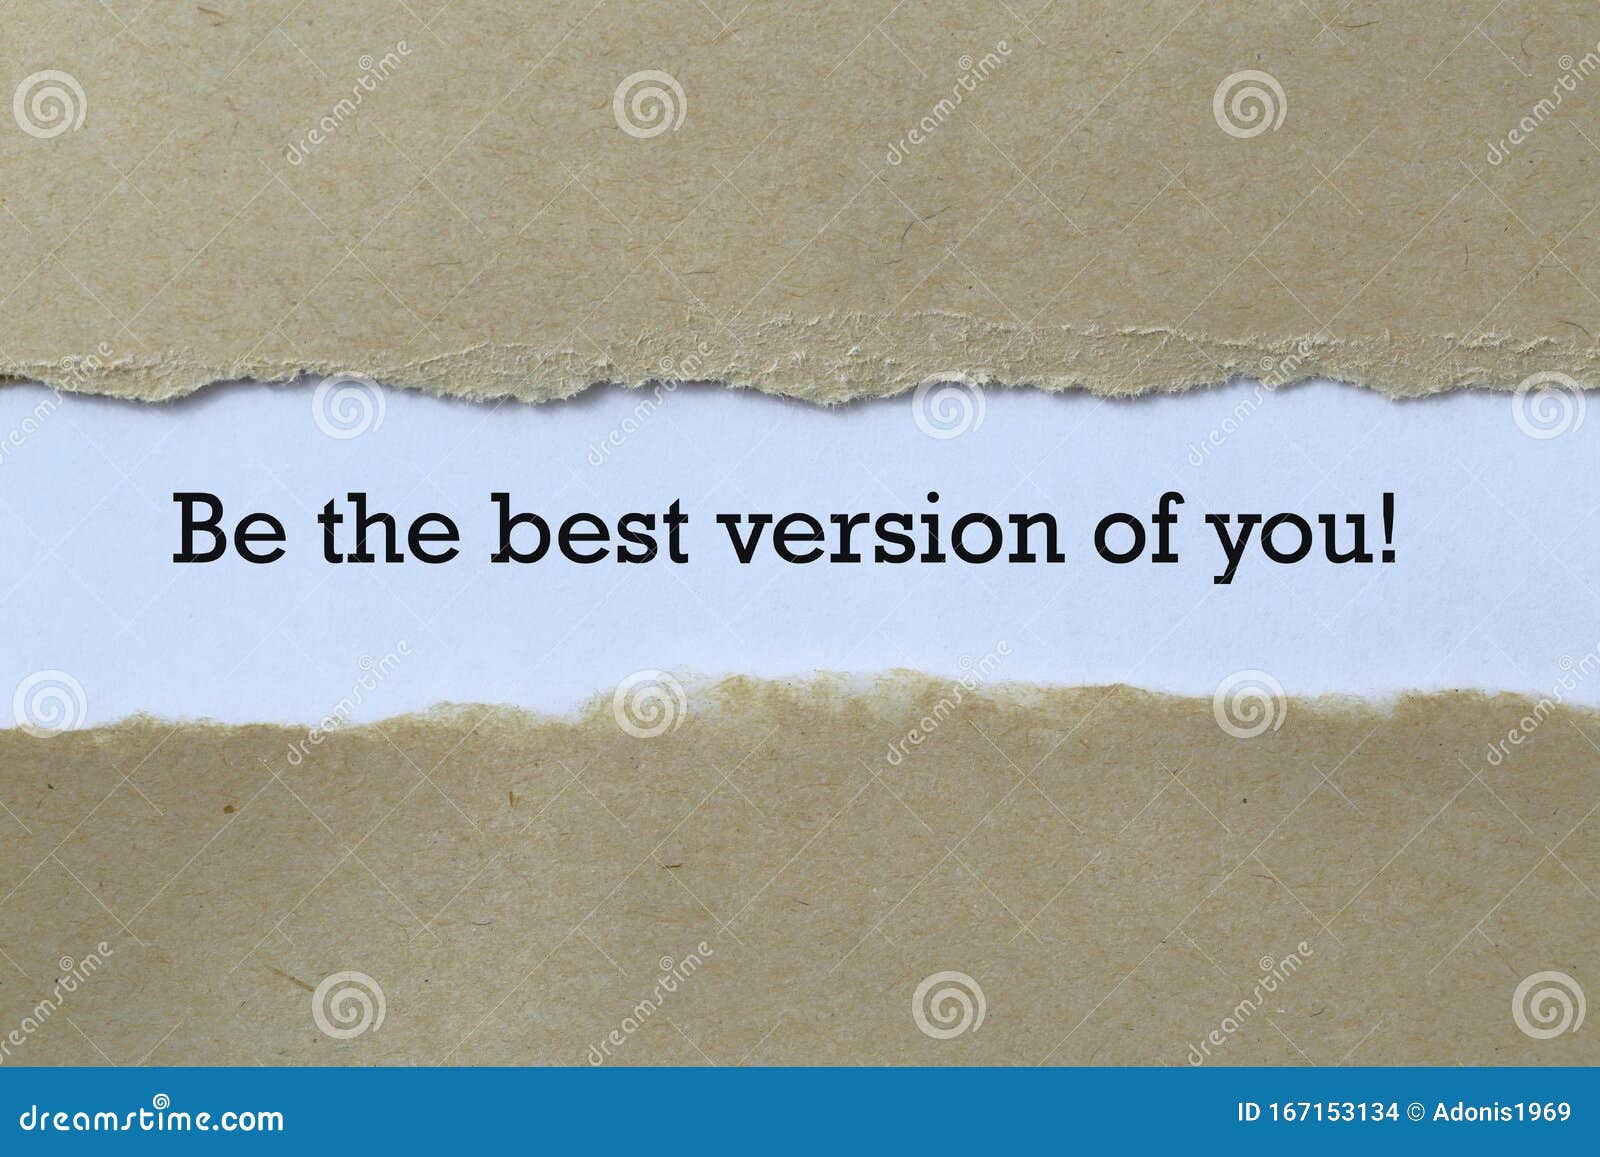 Be the best version of you stock photo. Image of decorative - 167153134